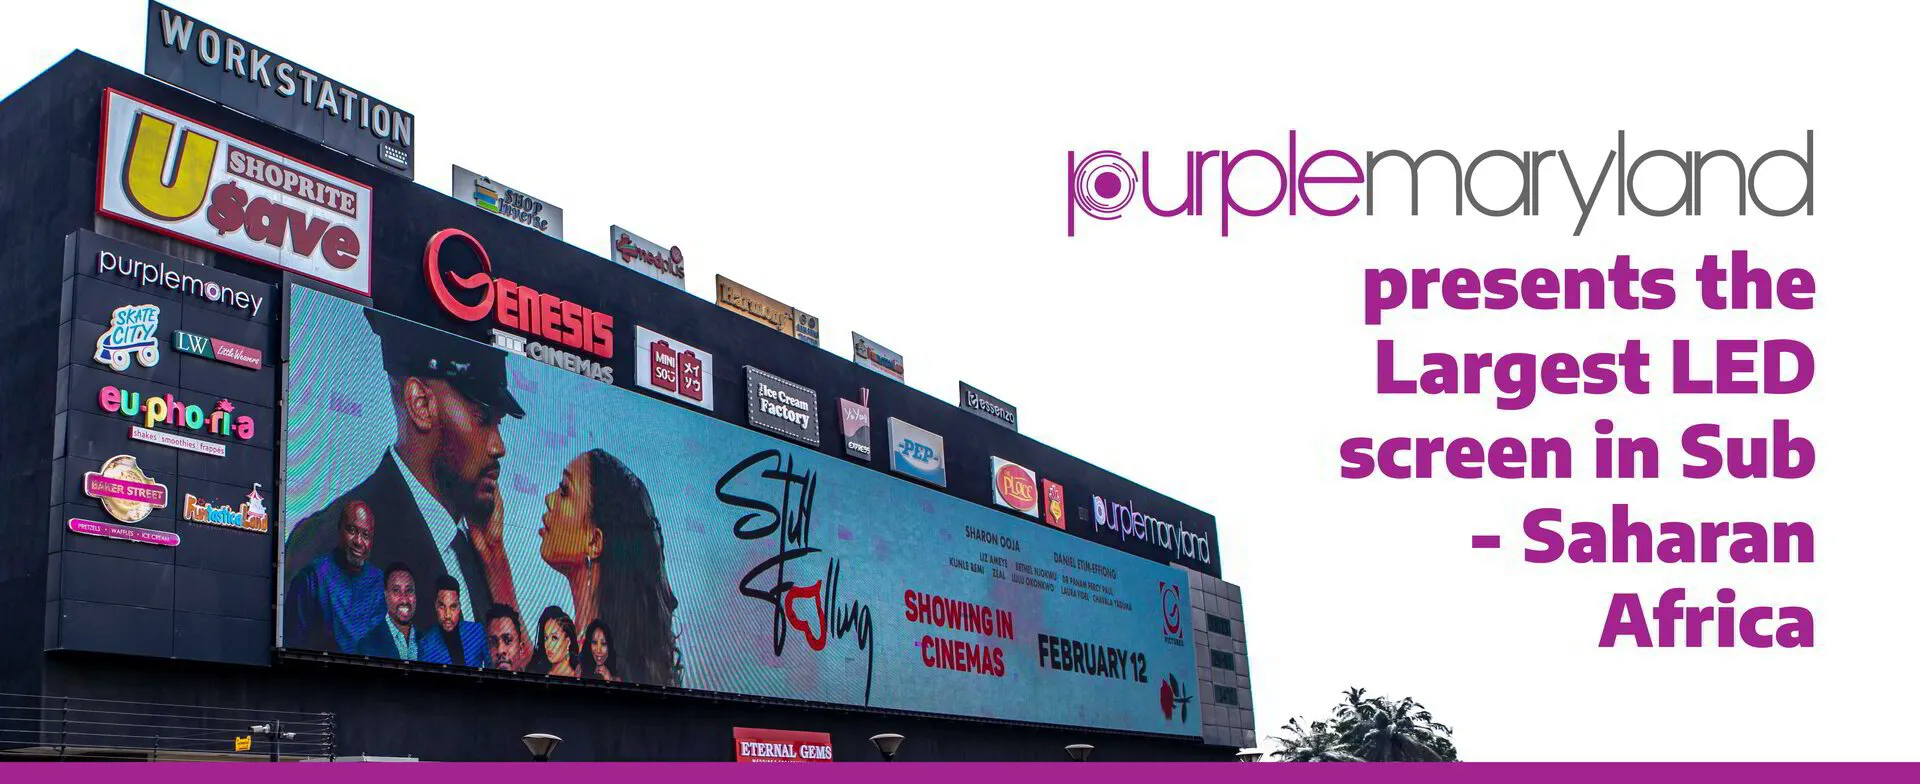 Purple Maryland presents the Largest LED screen in Sub - Saharan Africa